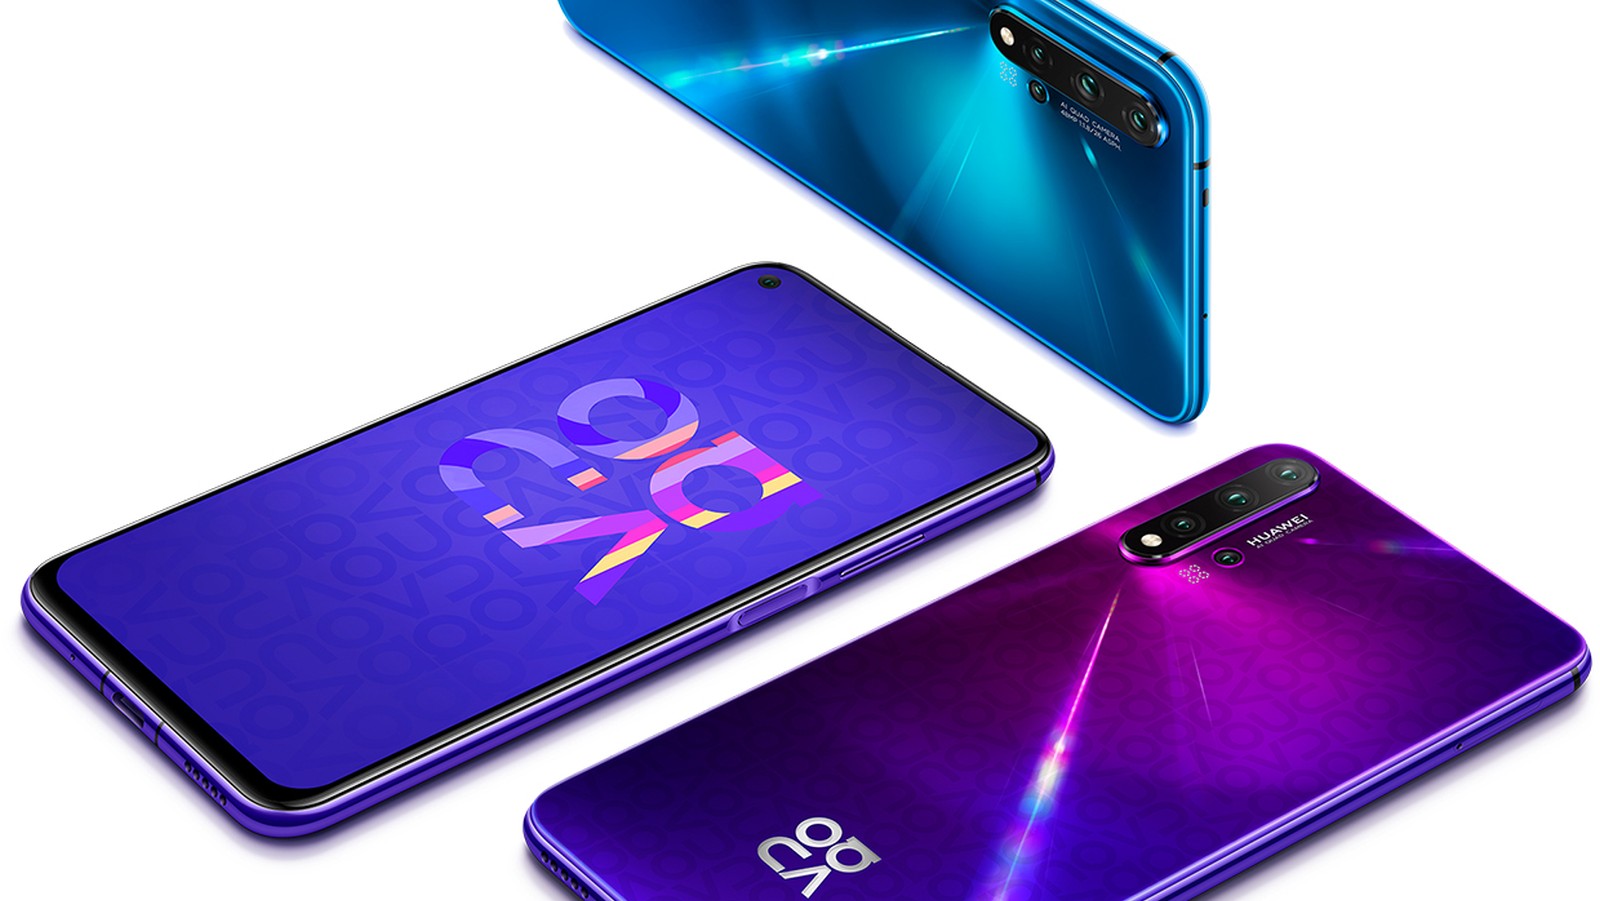 Huawei Nova 5T Colors : HUAWEI Nova 5T Tempered Glass Case Solid Color Luxury Hard ... - List of mobile devices, whose specifications have been recently viewed.